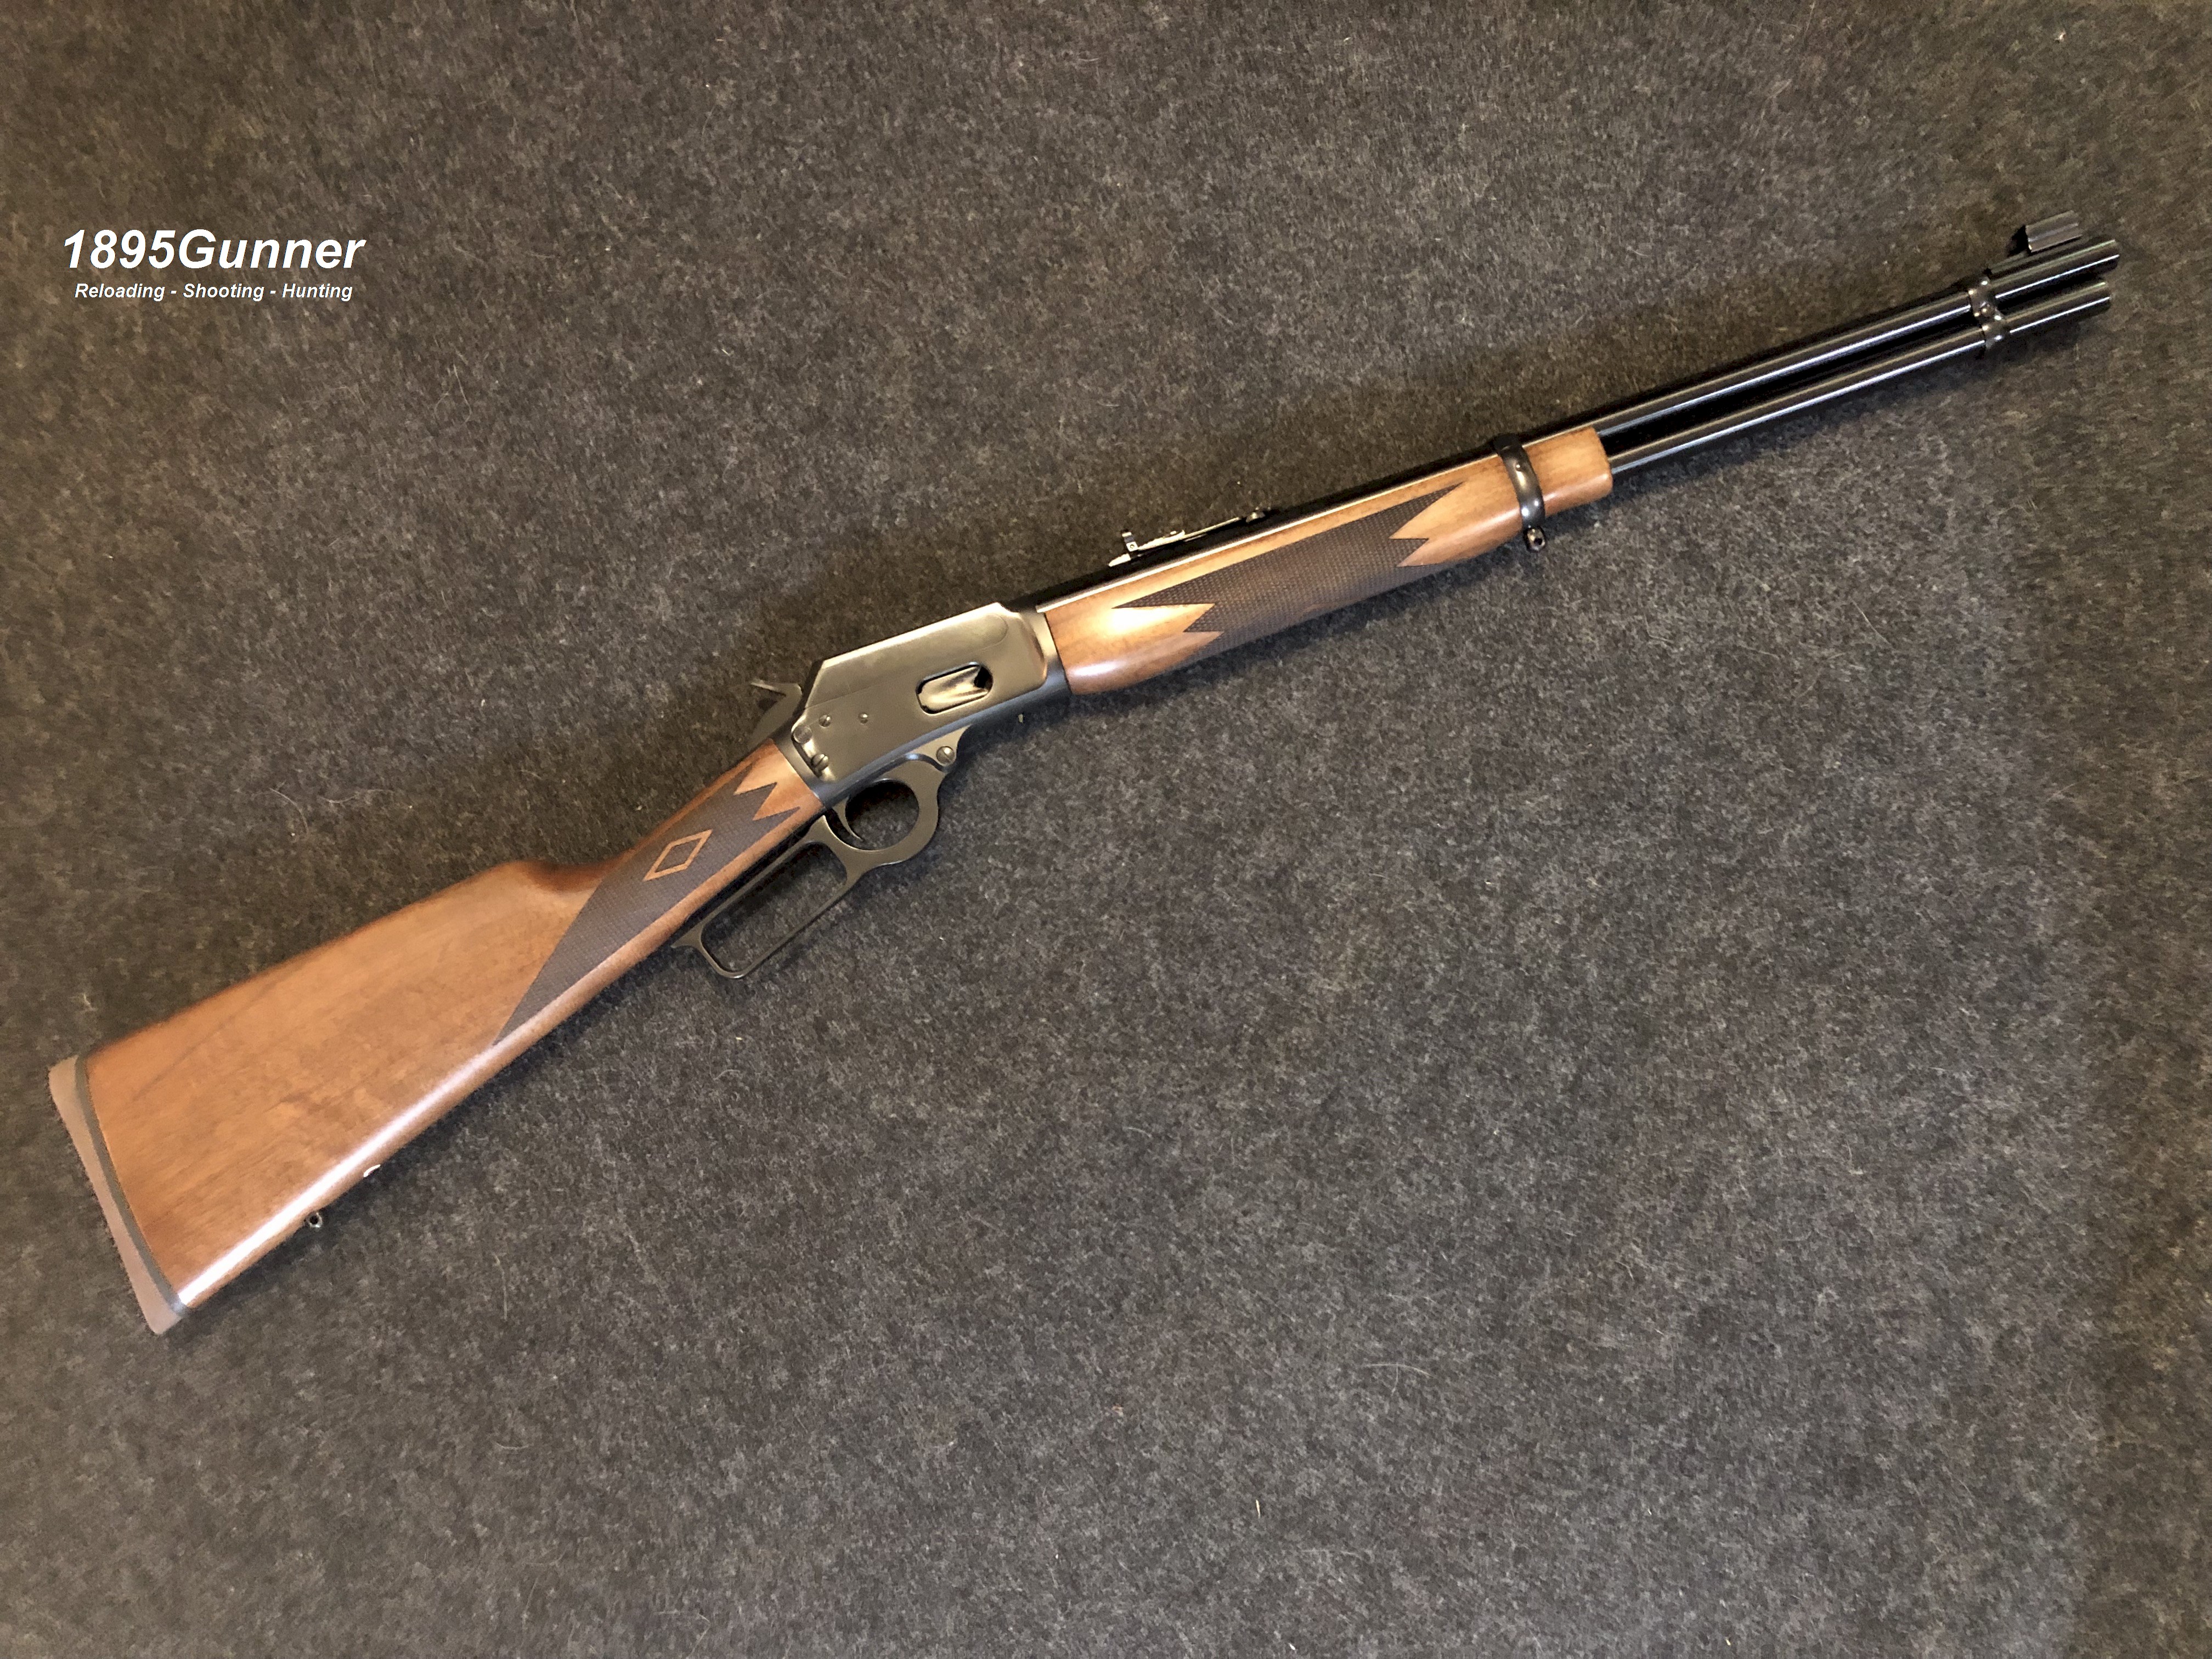 The Marlin 1894 Classic .44 Magnum